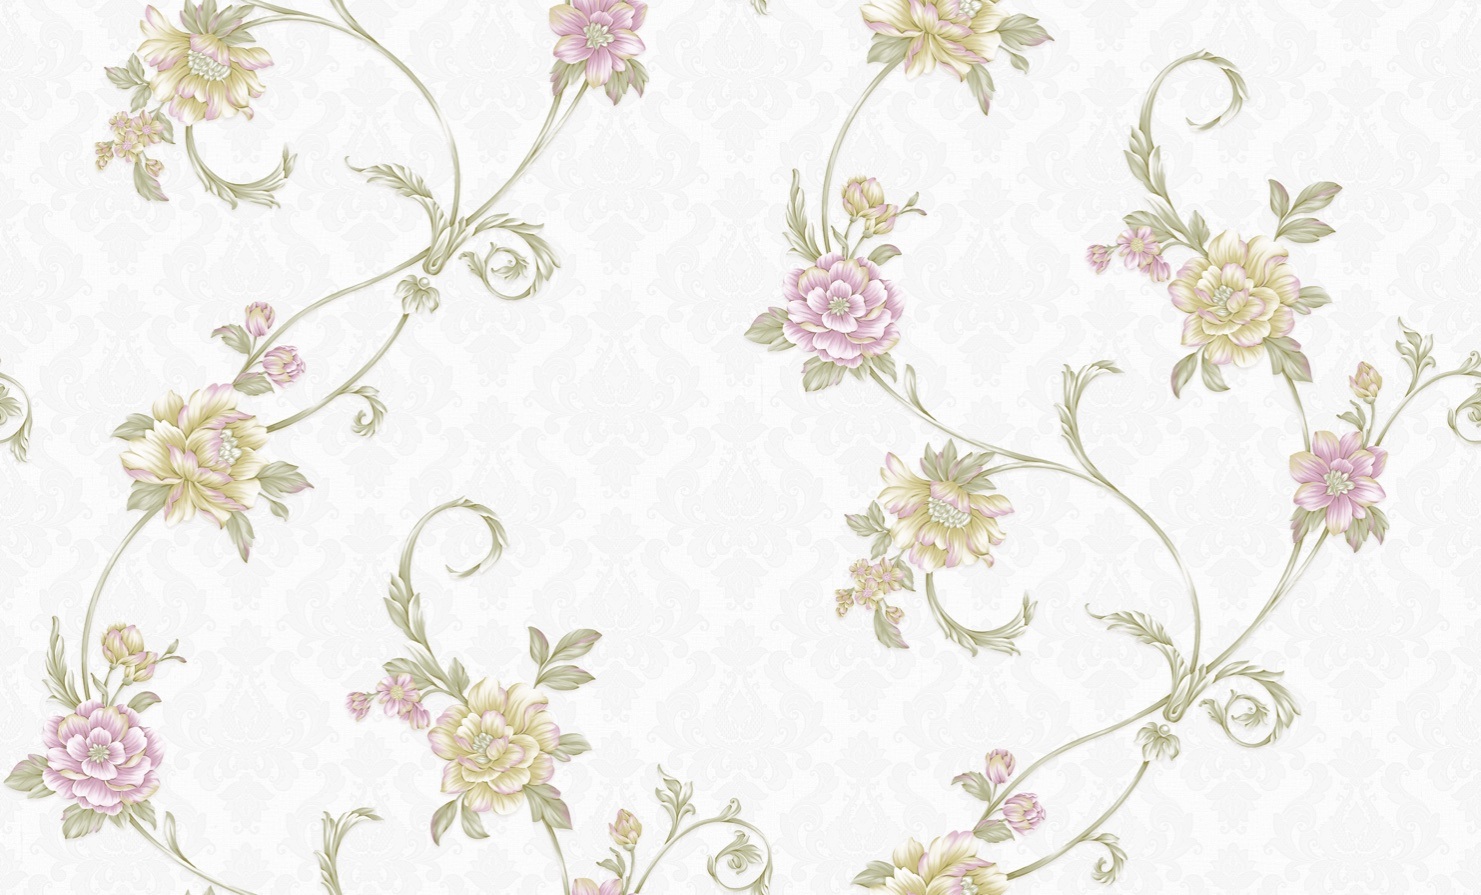 106 PVC Vinyl Wallpaper Hot Selling PVC Wall Paper for Home Decoration